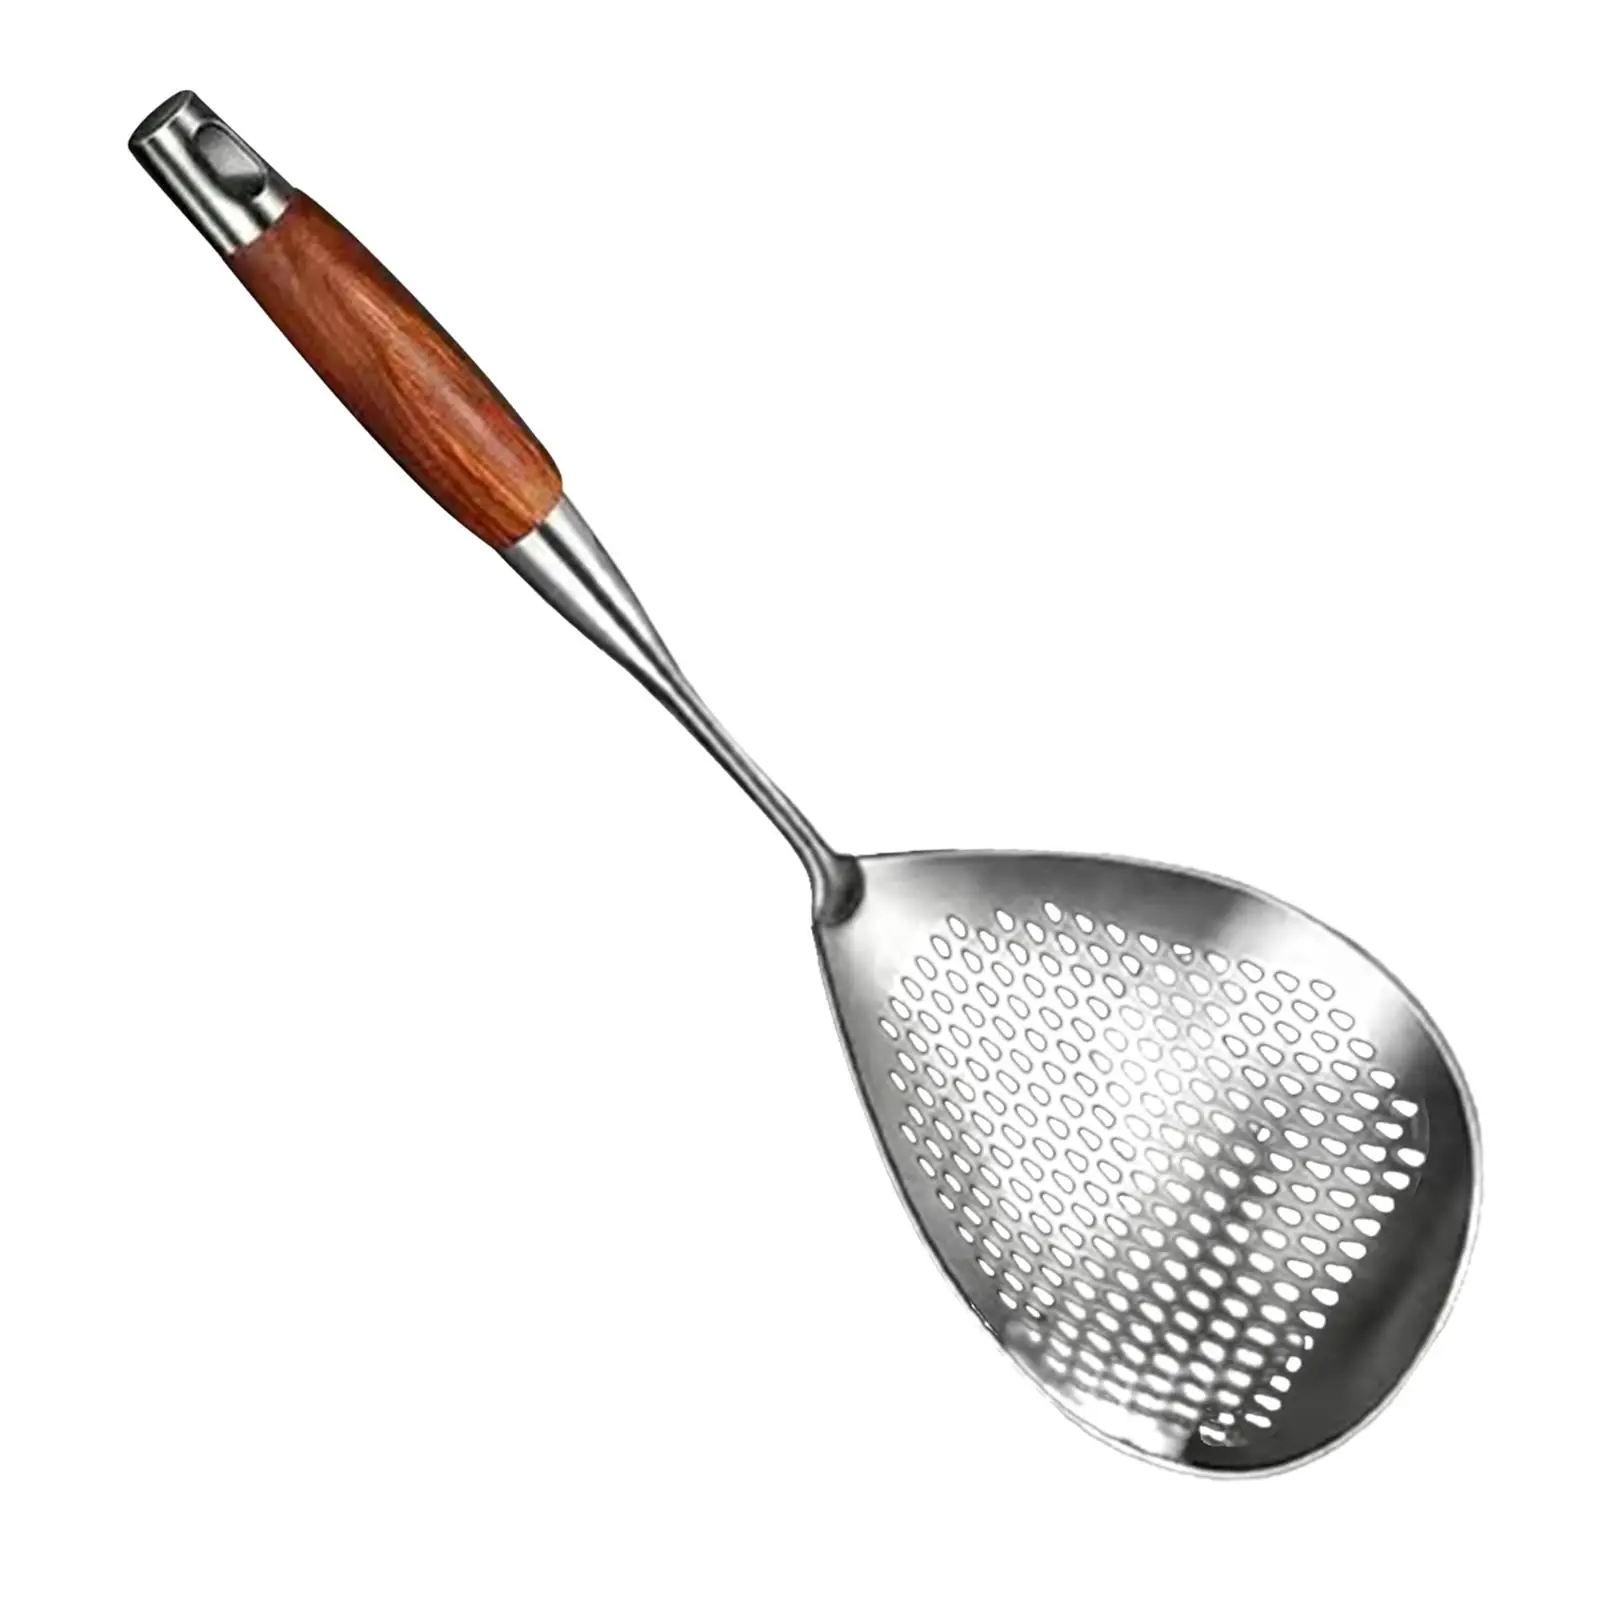 Skimmer Slotted Spoon Comfortable Grip Food Strainer Stainless Steel Colander for Scooping French Fries Cooking Noodles Baking